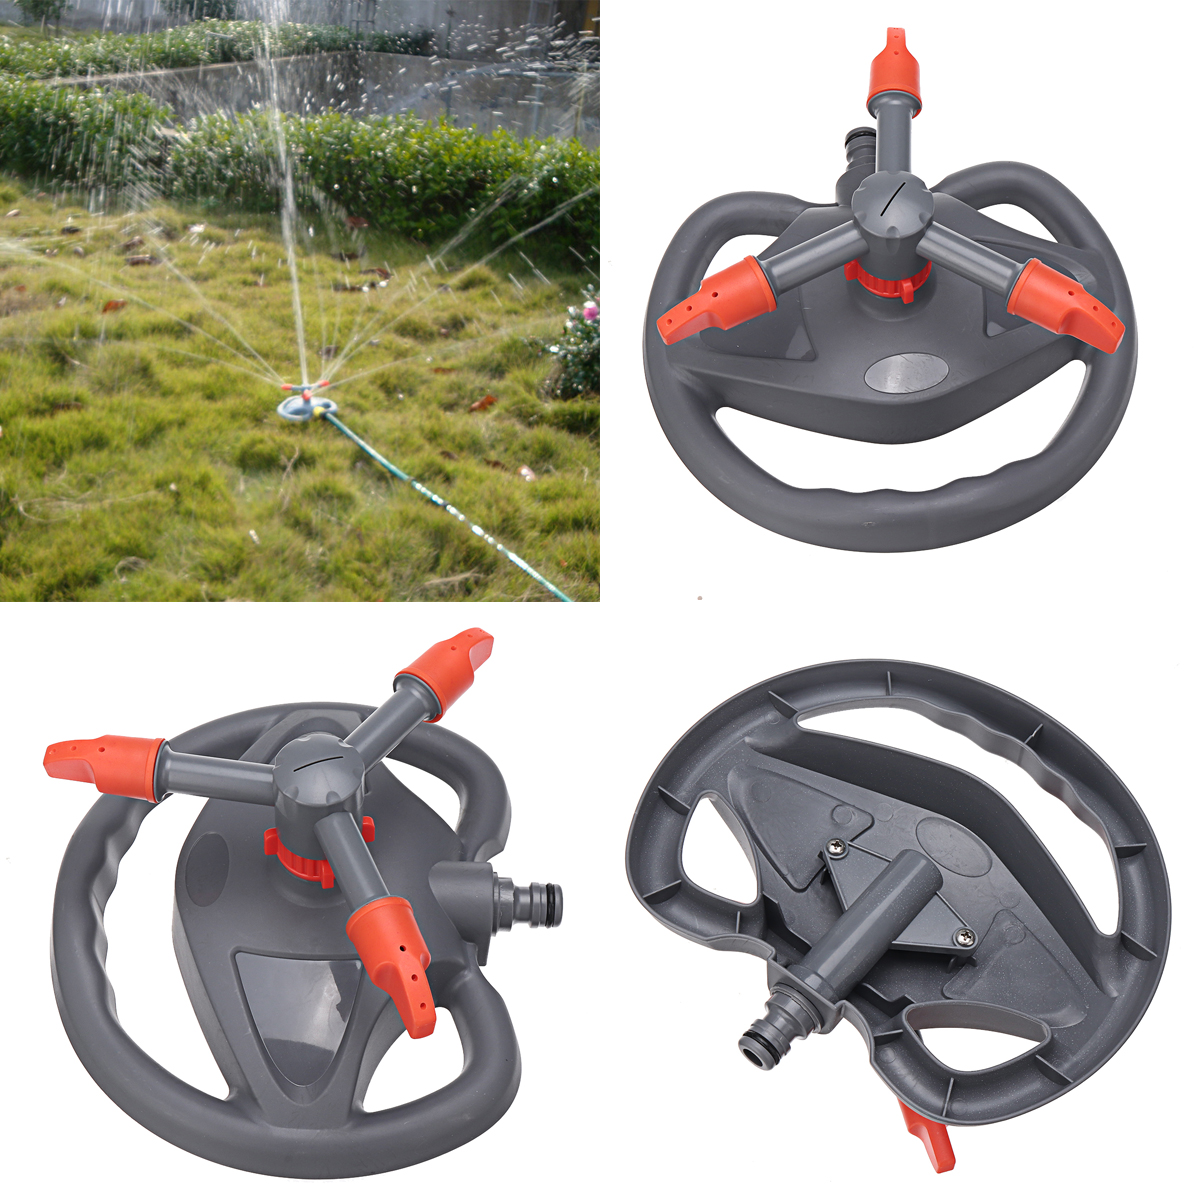 Gardening-Watering-Tool-360deg-Rotating-Sprinklers-Automatic-Watering-Grass-Lawn-Fully-3-Nozzle-Circ-1700837